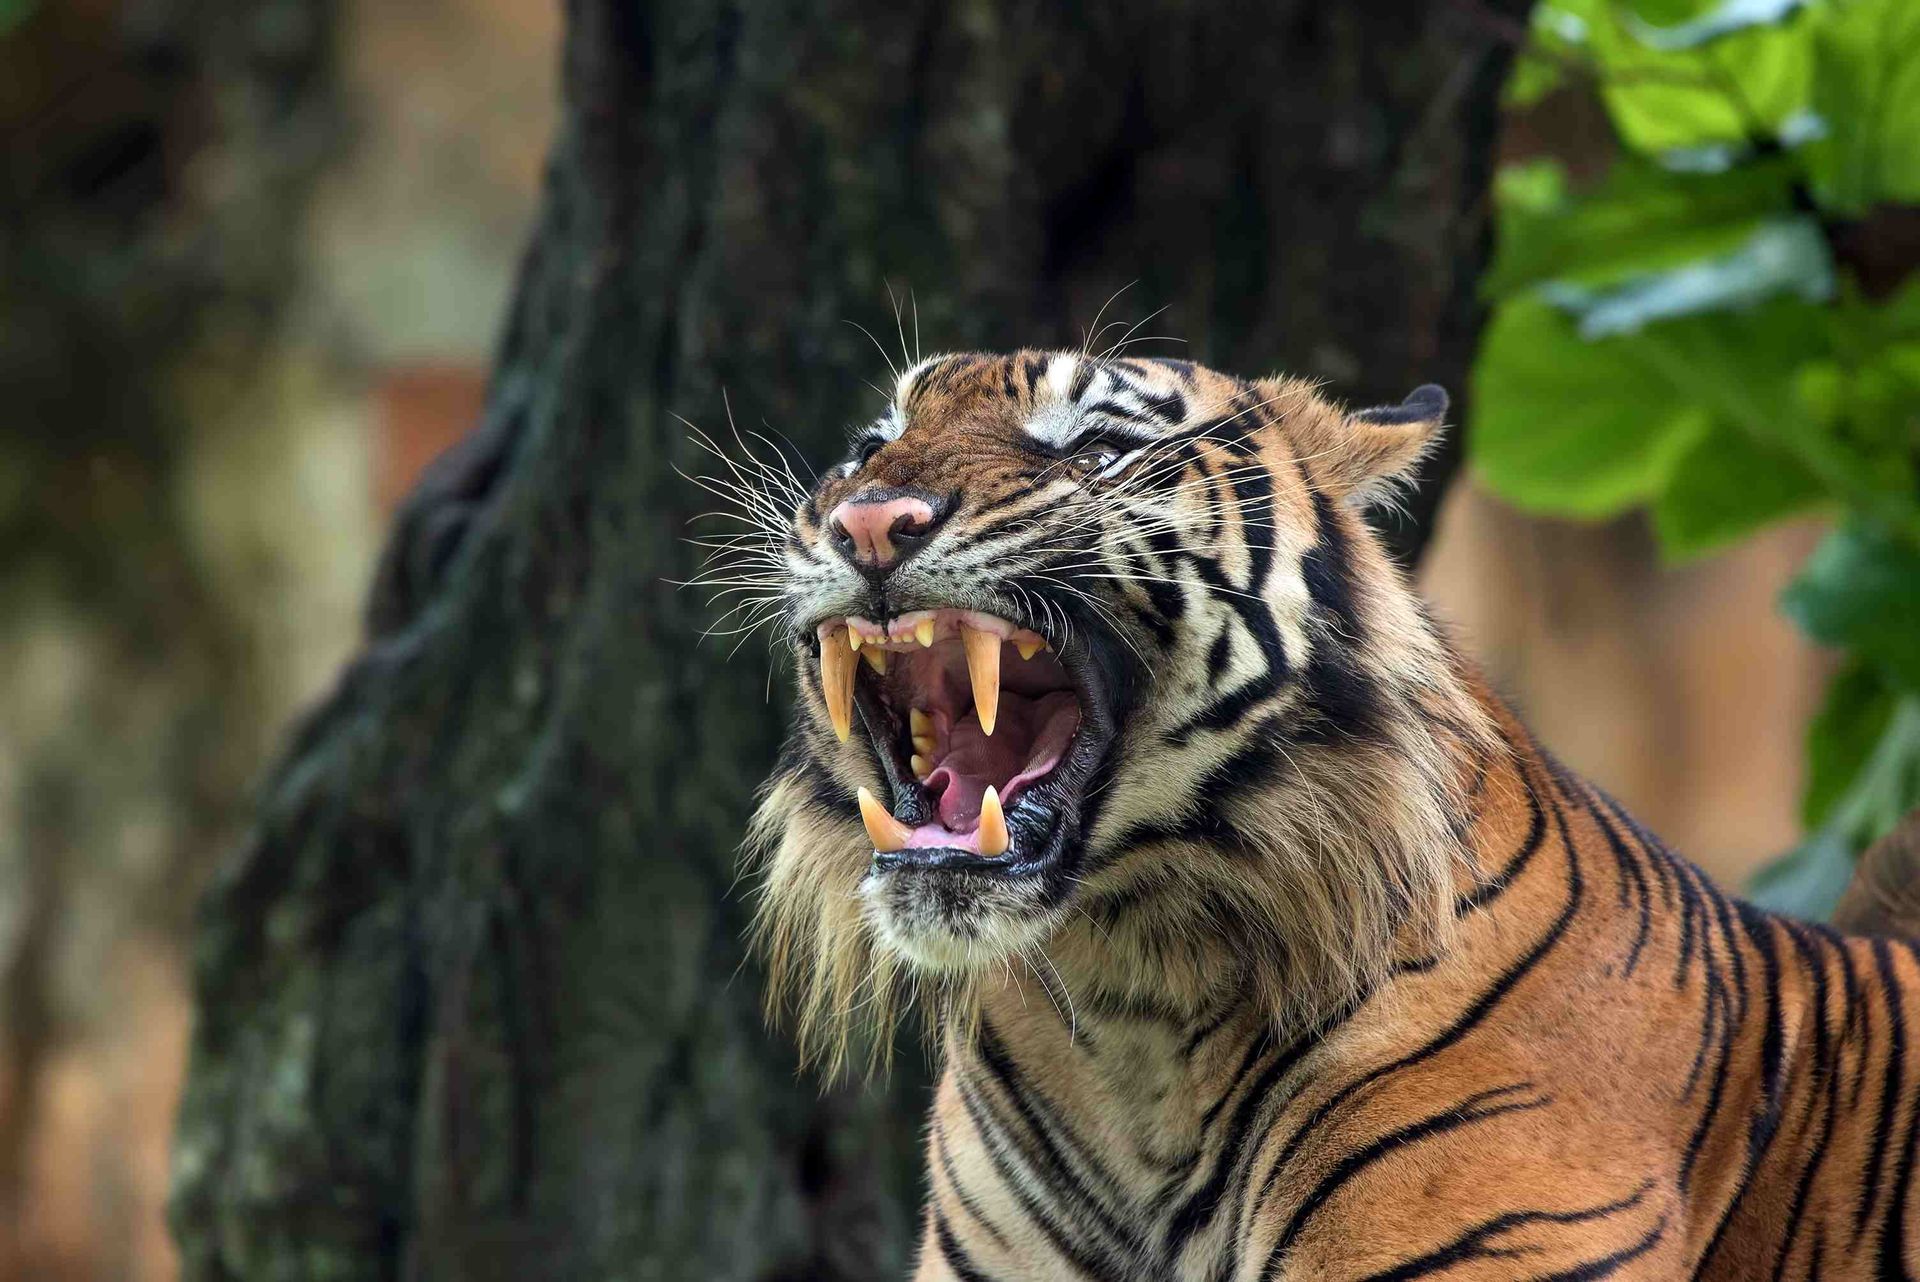 A professional photograph of a tiger growling